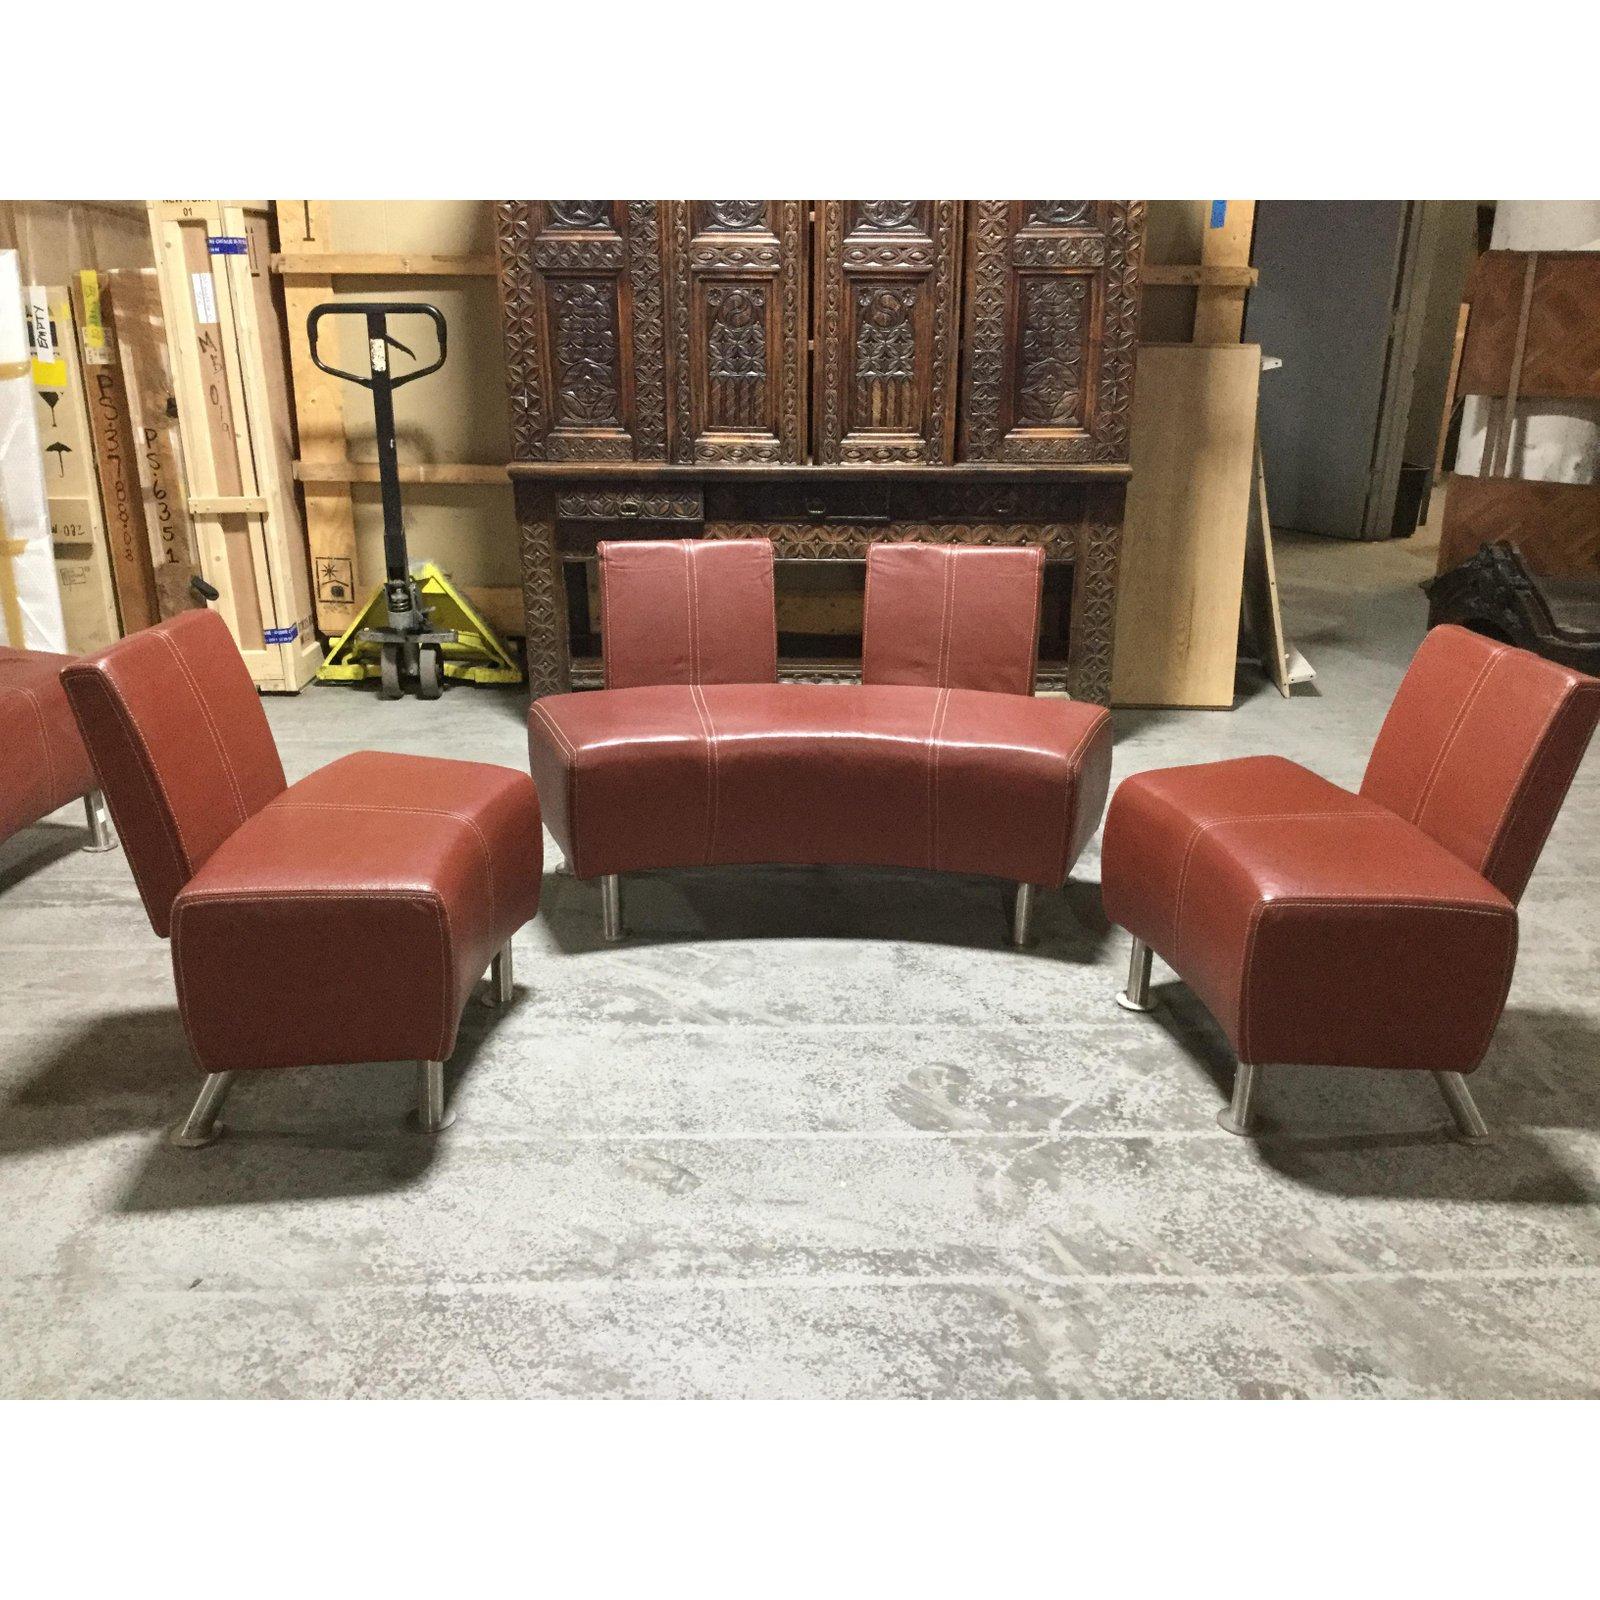 Chic Italian Industrial Leather Salon Set with Two Chairs and Loveseat 2